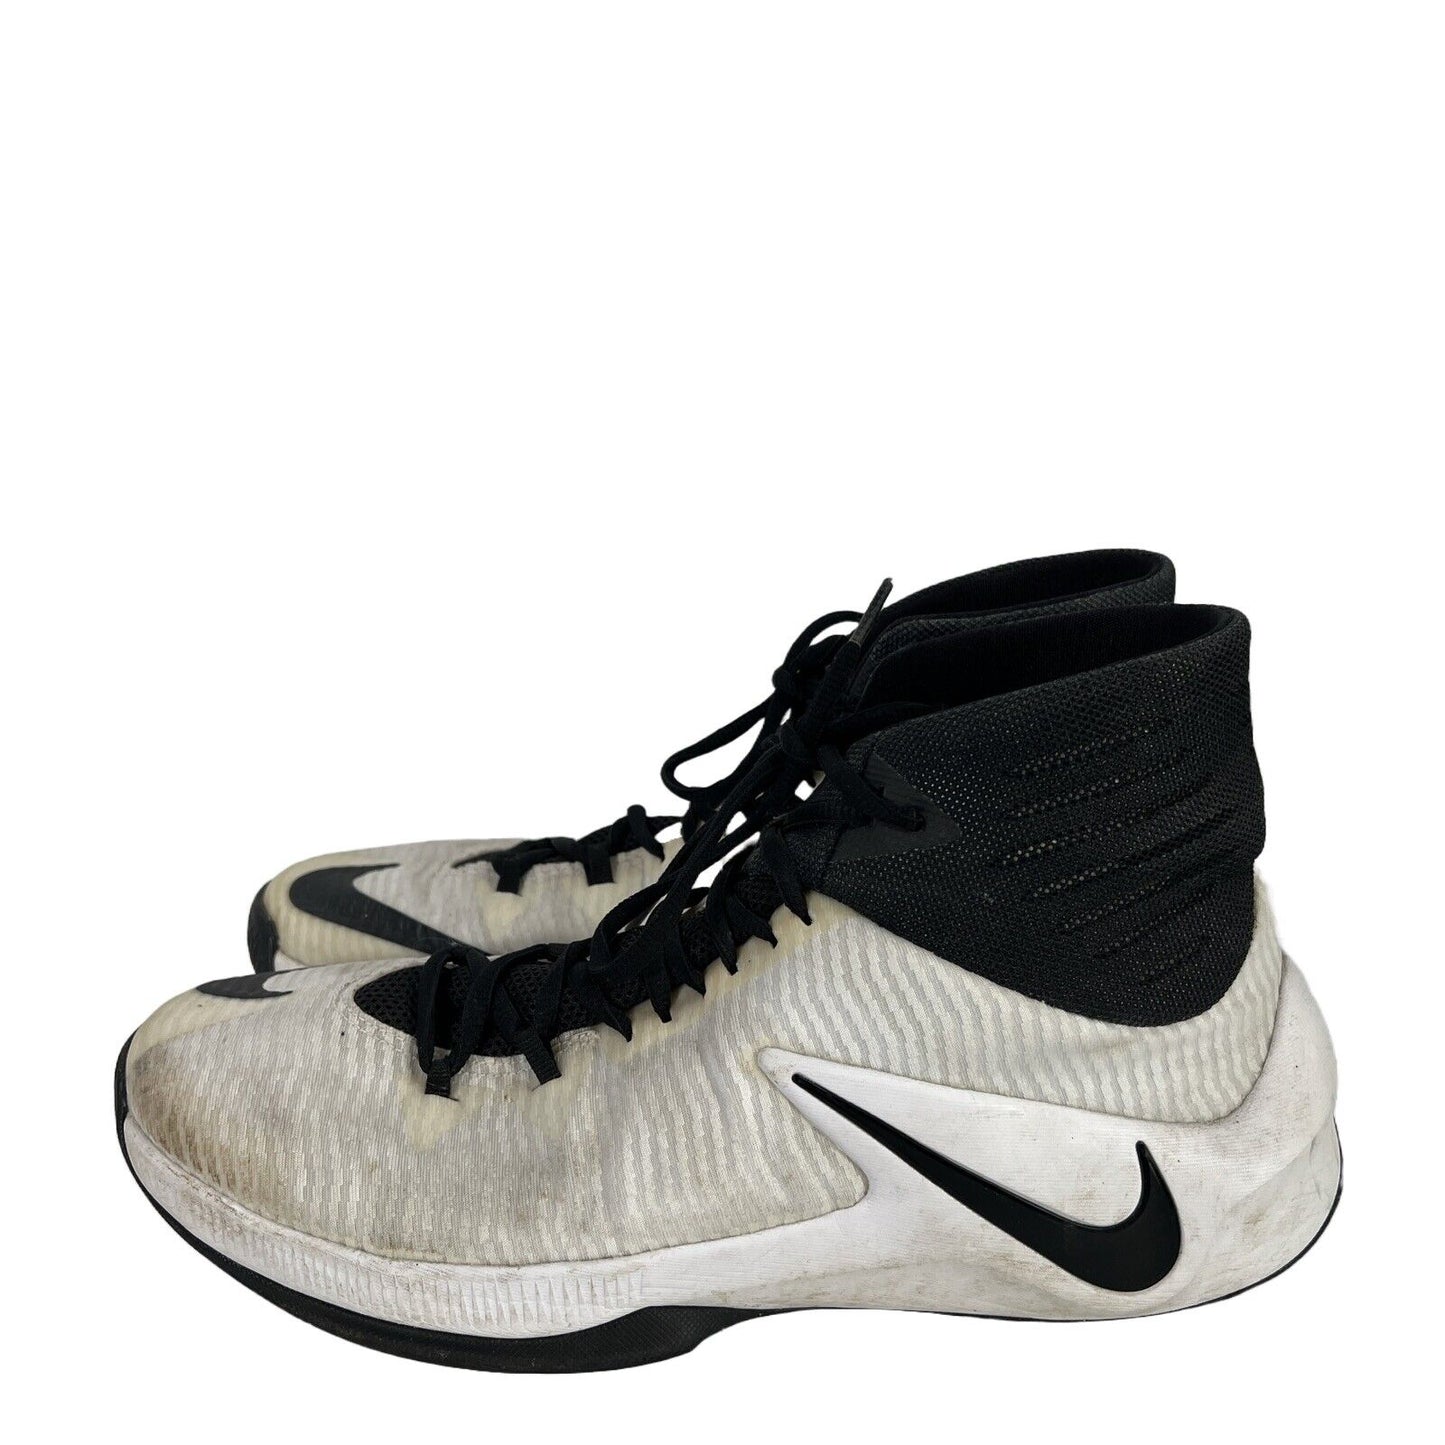 Nike Men's White/Black Clear Out Lace Up Basketball Shoes - 12